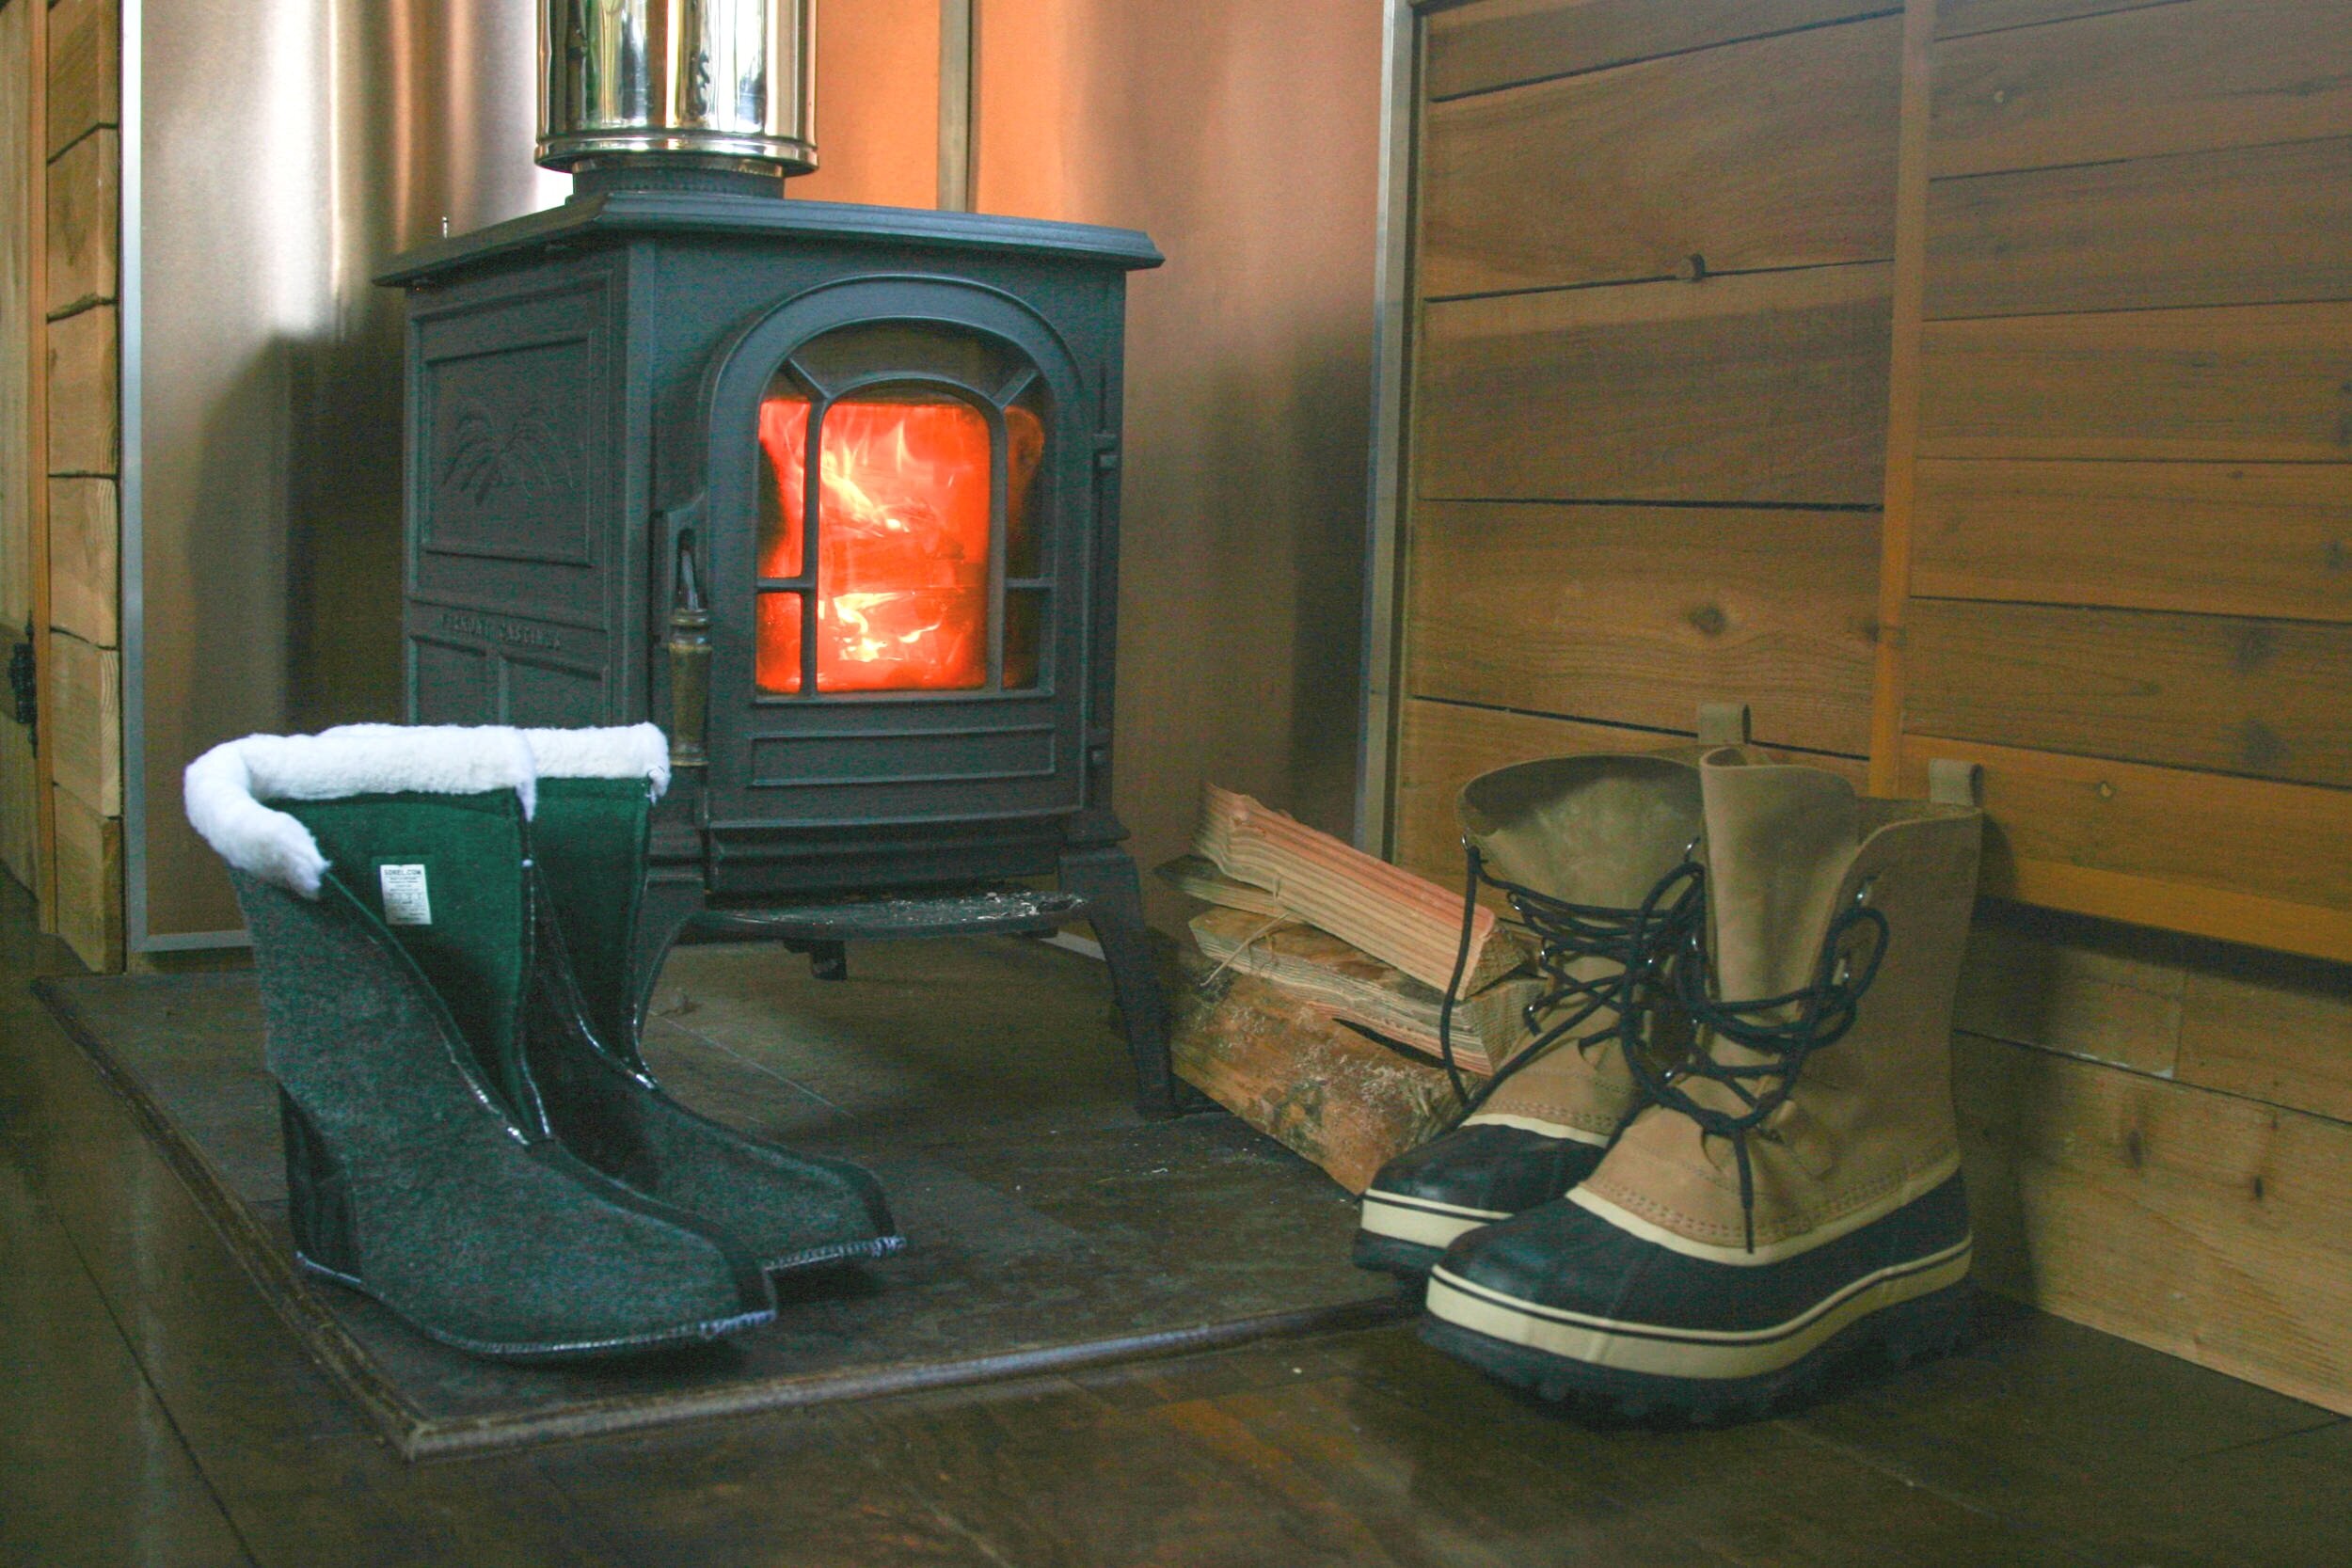 THE SOREL CARIBOU’S LINERS COME OUT FOR EASY DRYING OR REPLACEMENT